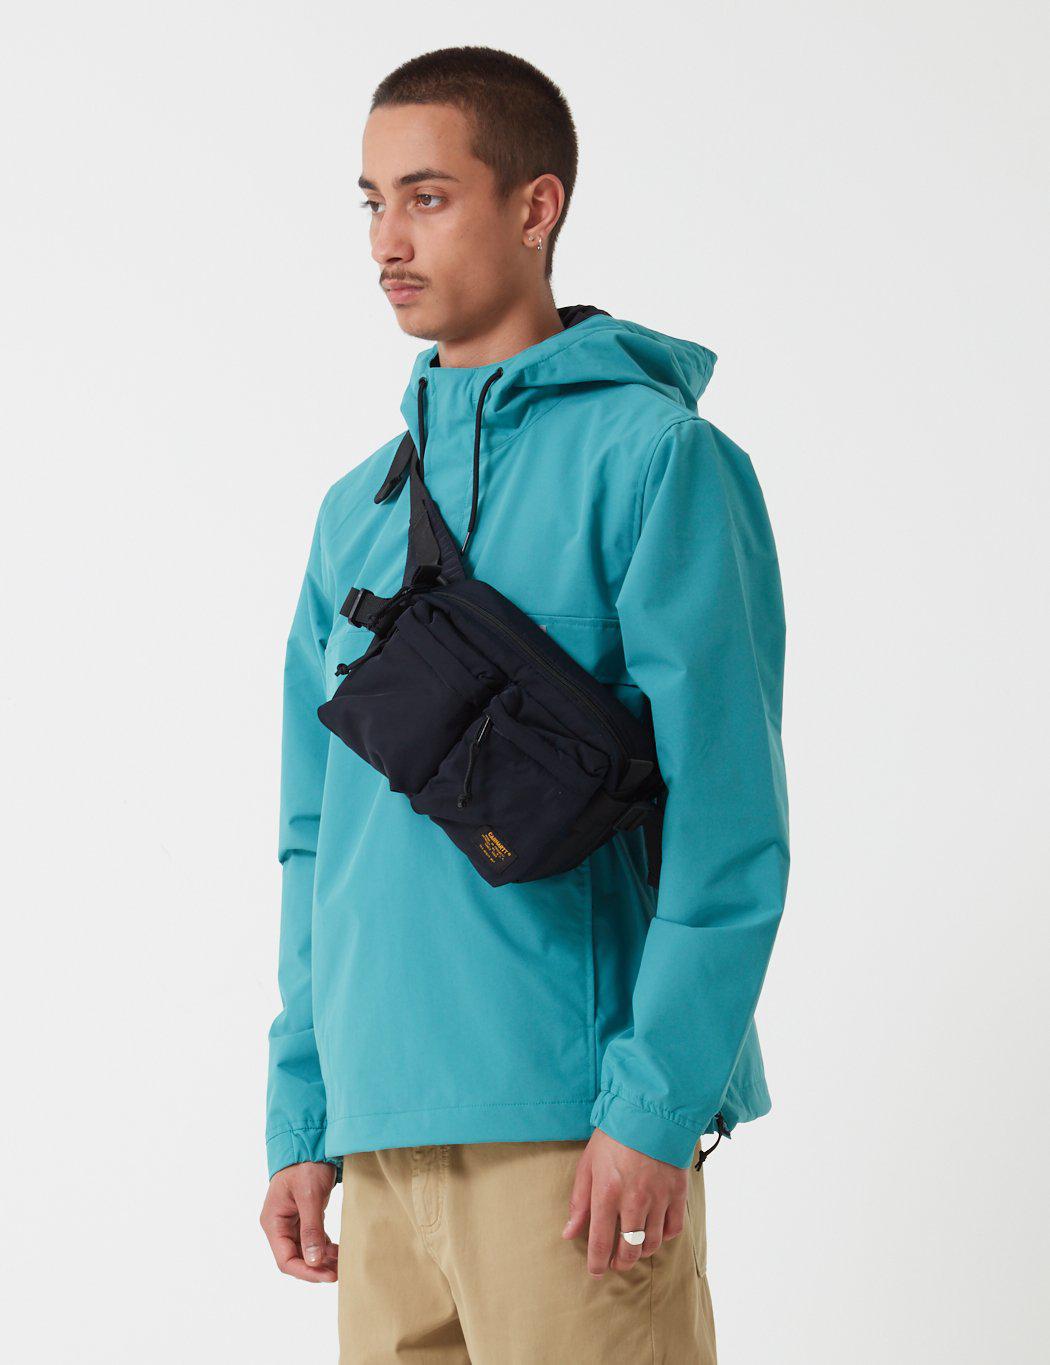 Carhartt Synthetic Wip Military Hip Bag in Navy (Blue) - Lyst